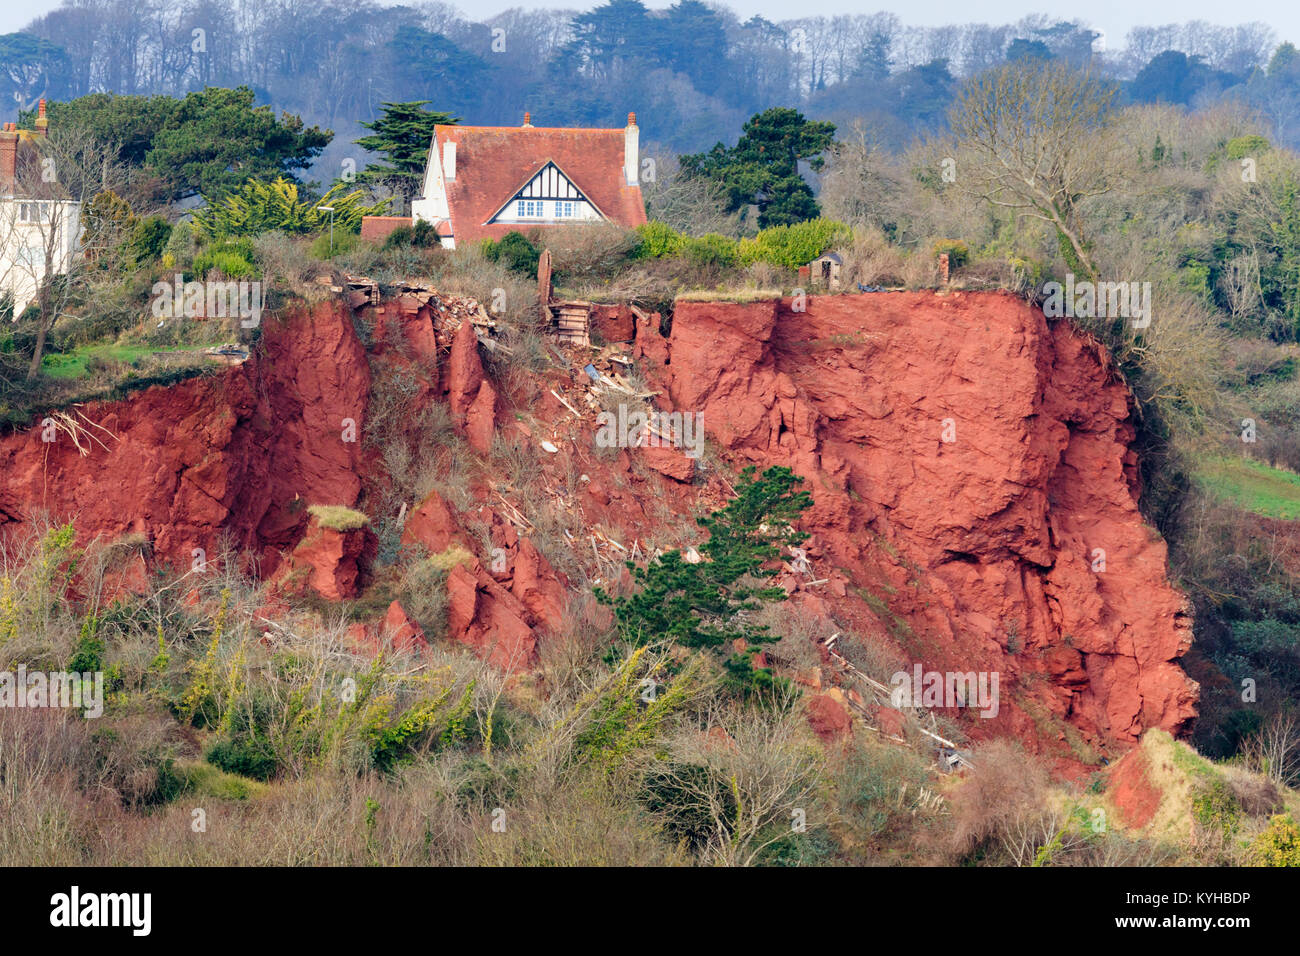 Red Permian breccia rockfall on the cliffs at Oddicombe beach, Babbacombe,Torquay, Devon. Wreckage from a destroyed house litter the slope. Stock Photo